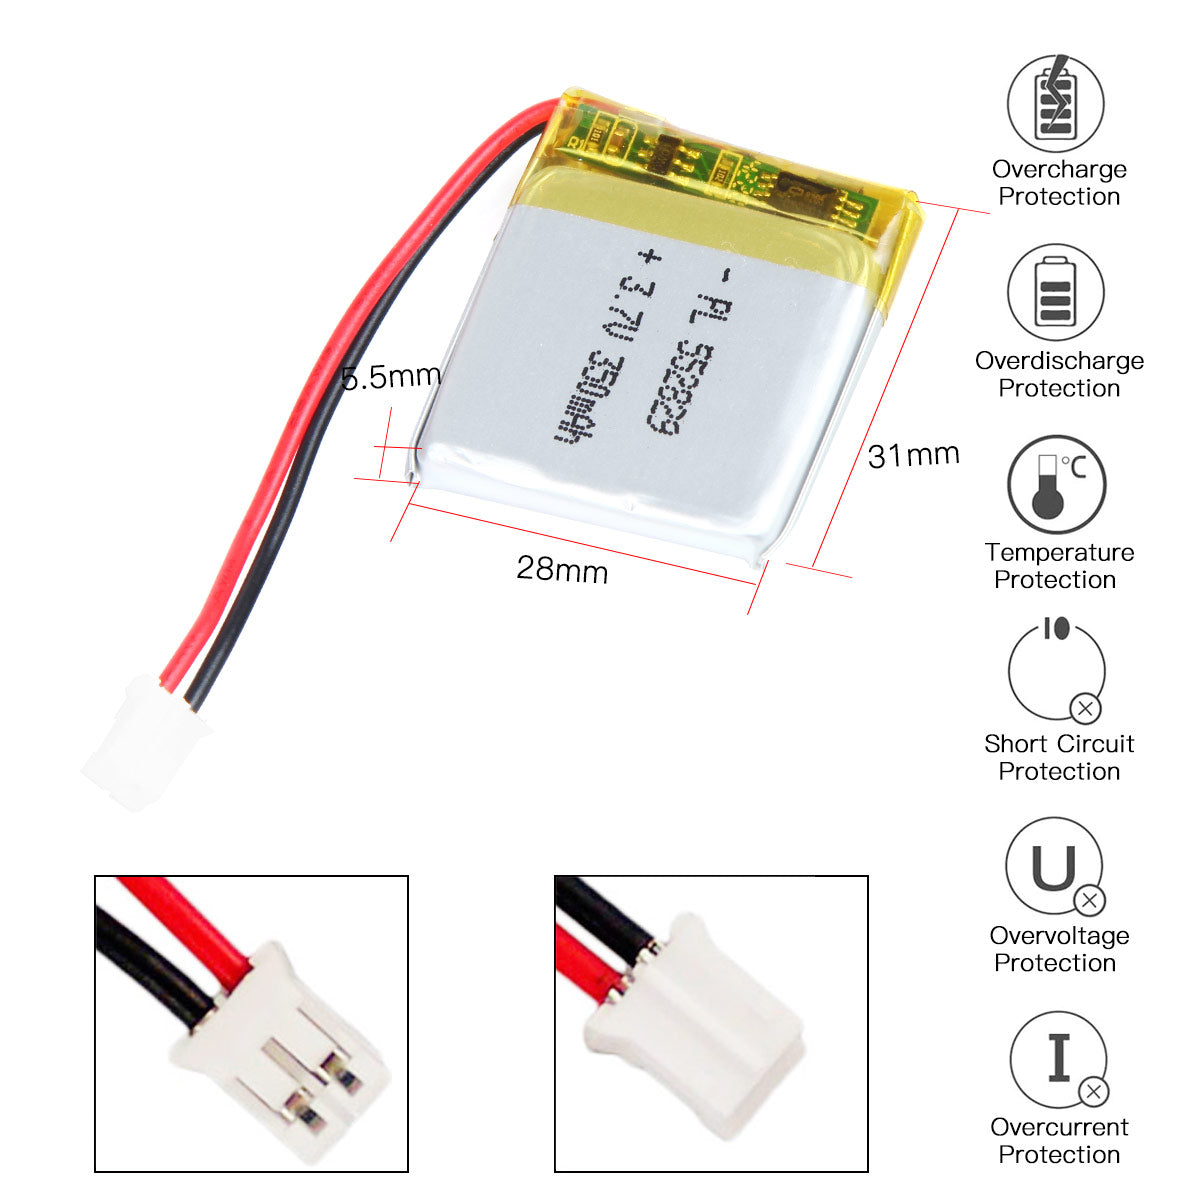 YDL 3.7V 350mAh 552829 Rechargeable Lithium Polymer Battery Length 31mm